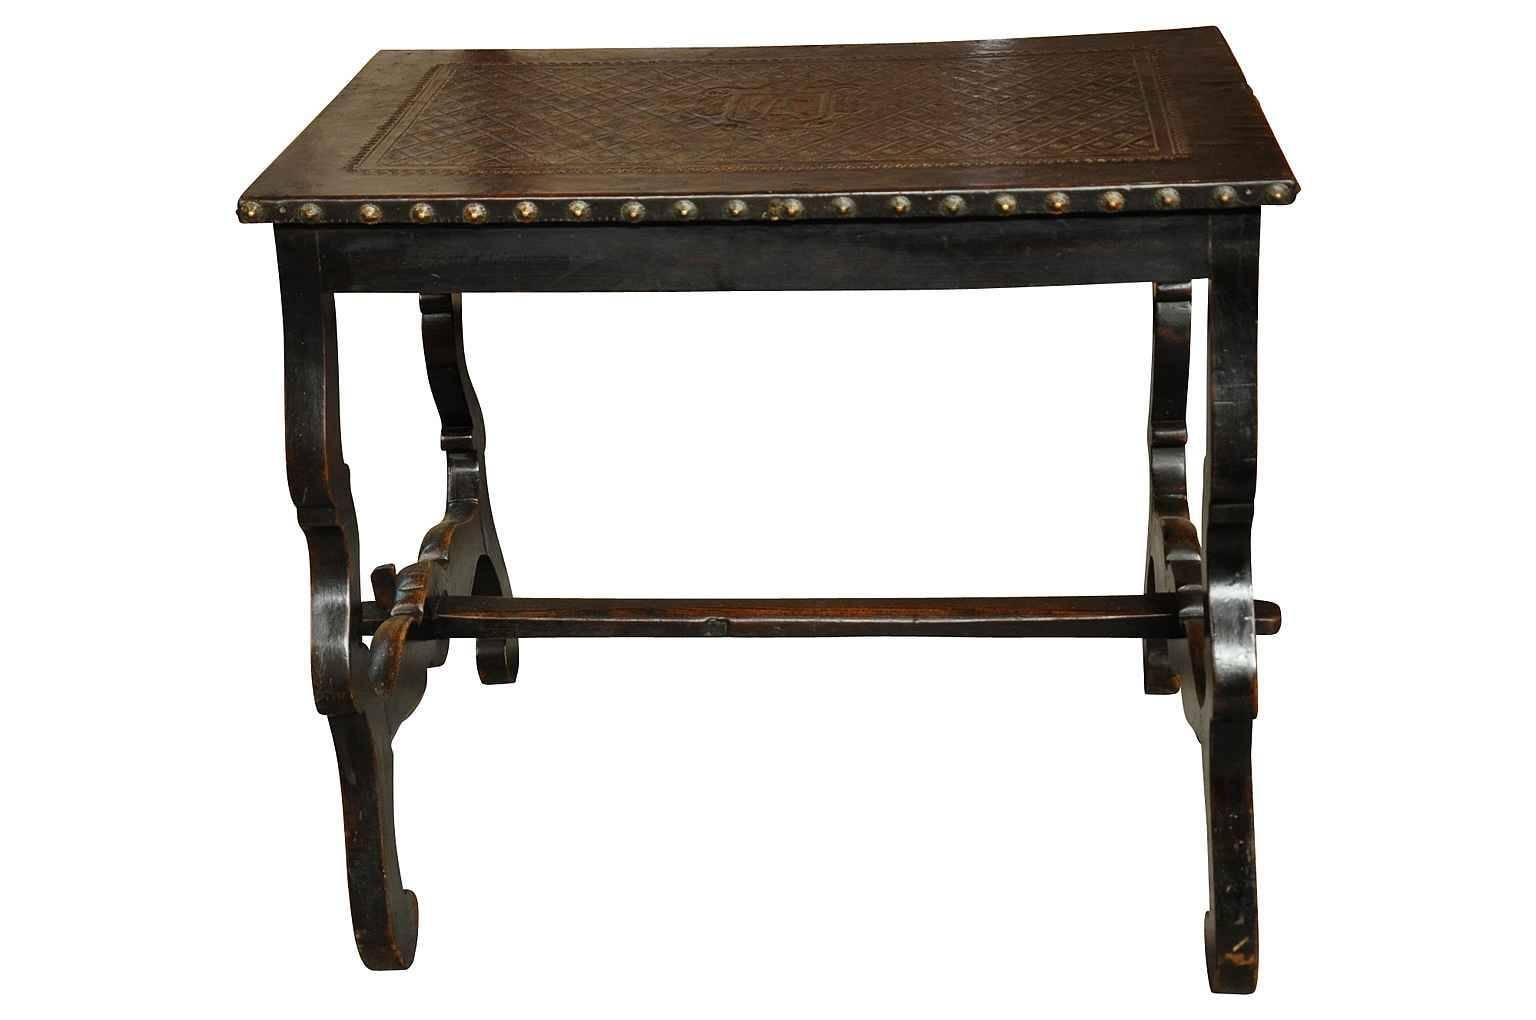 A very intriguing early 19th century side table from the Catalan region of Spain. Wonderfully constructed from walnut with classical lyre shaped legs. The top is enveloped in hand tooled leather, presenting a Blasson, family crest or coat of arms.